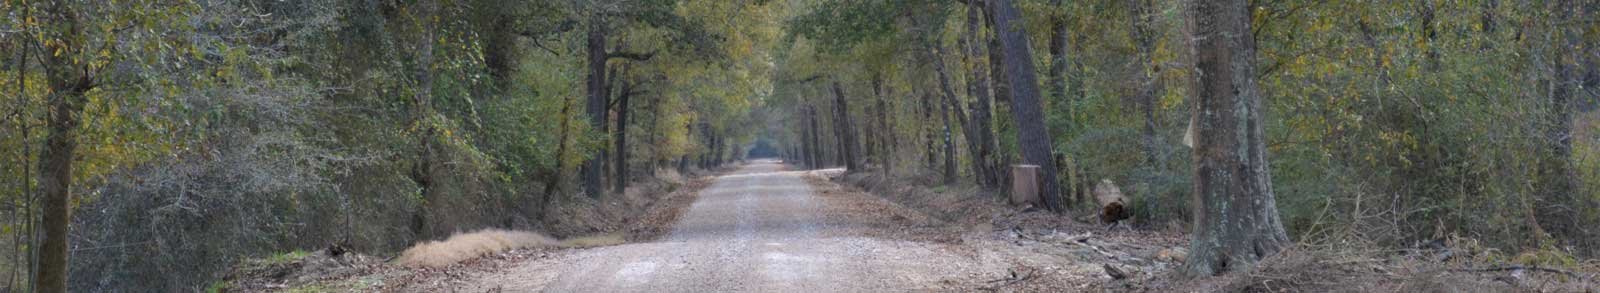 Long dirt road with trees on both sides